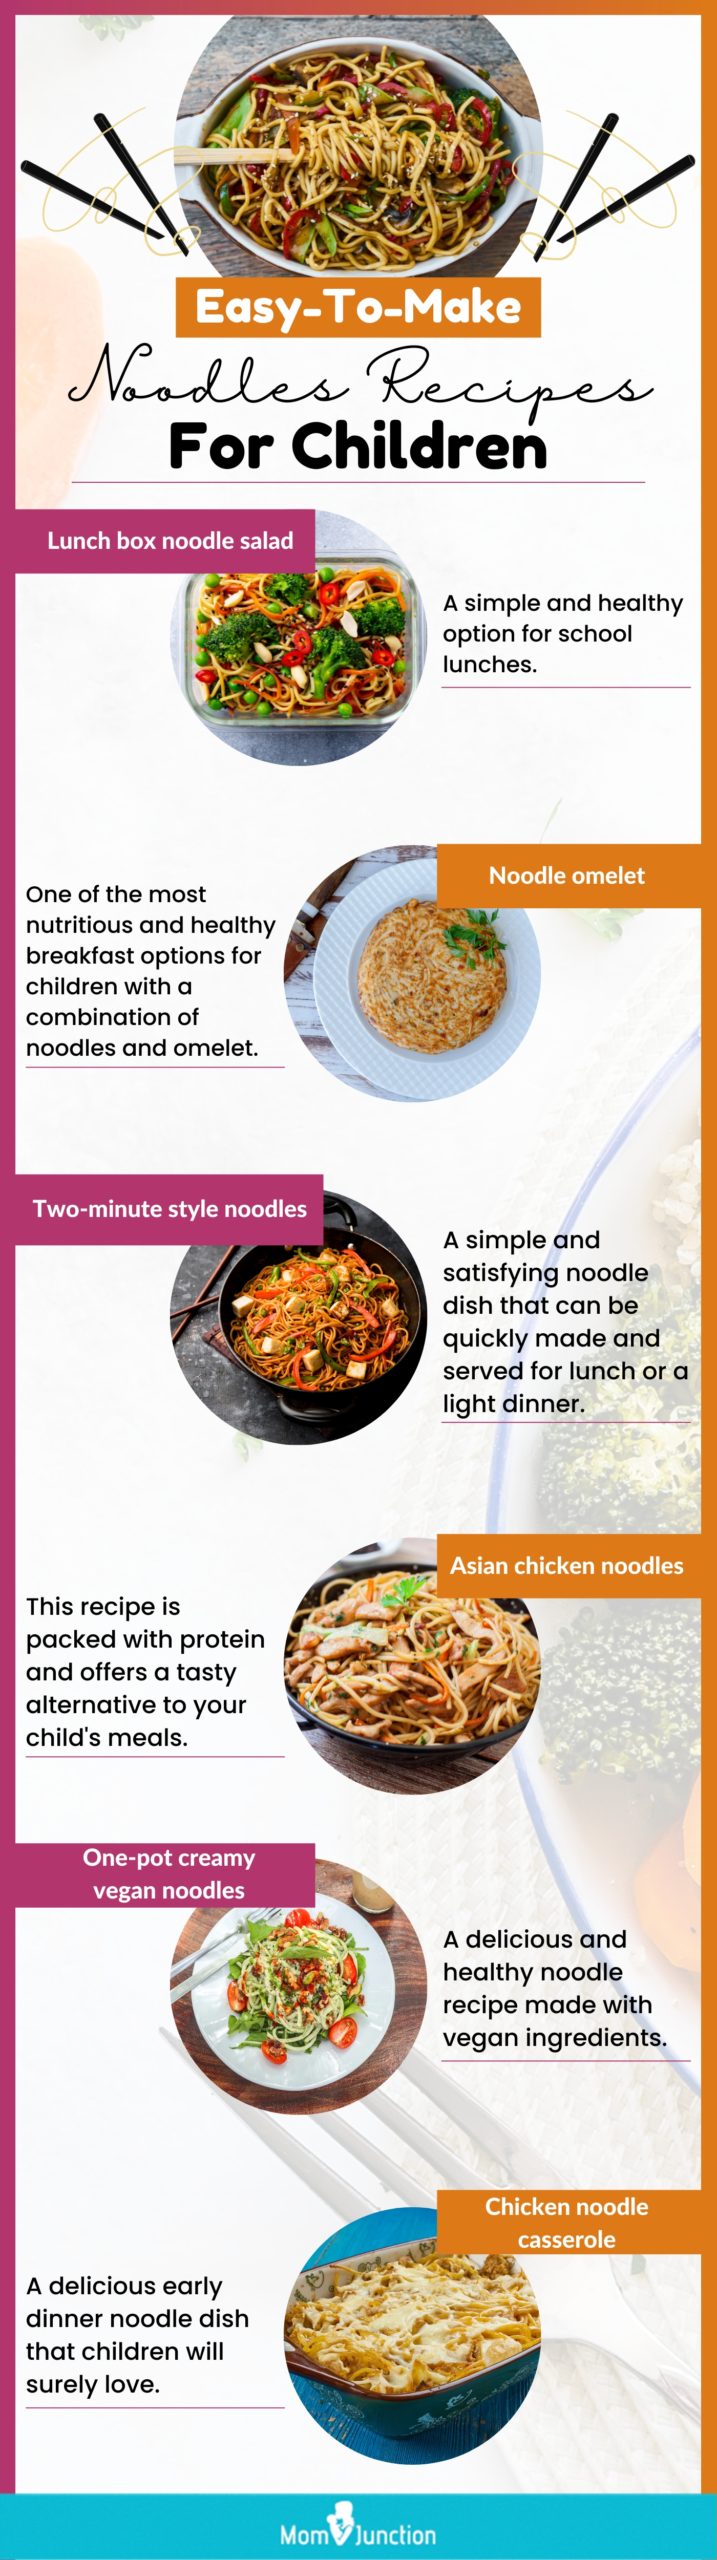 easy to make noodles recipes for children (infographic)